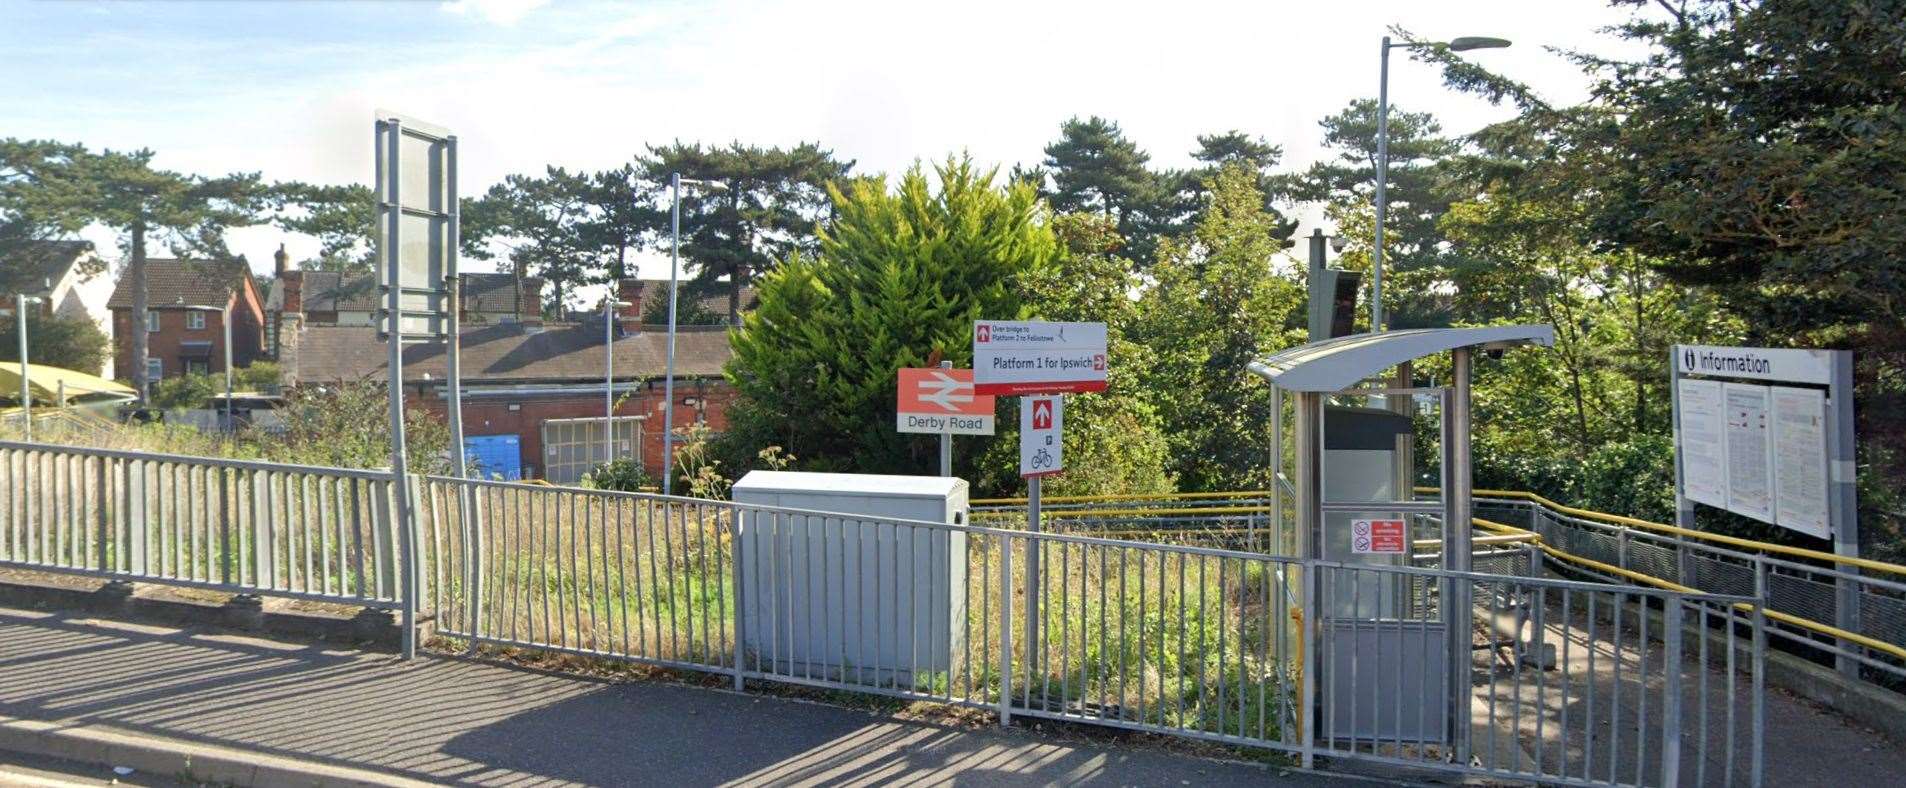 Derby Road, Ipswich is the tenth least used station in Suffolk, with 73,198 entries and exits in the last period. Picture: Google Maps